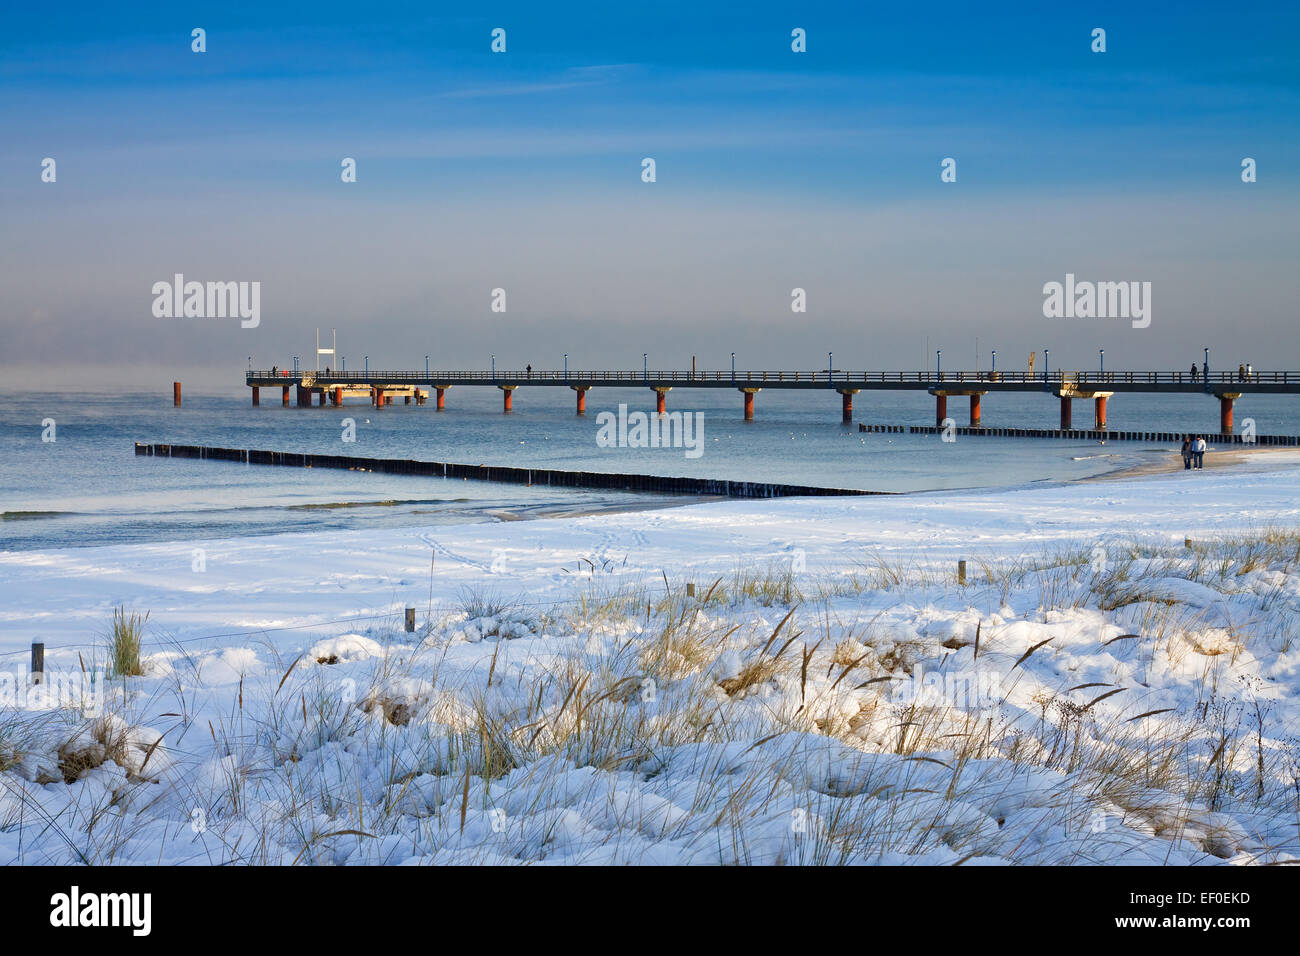 Alamy images - photography hi-res Zingst seebrucke stock and